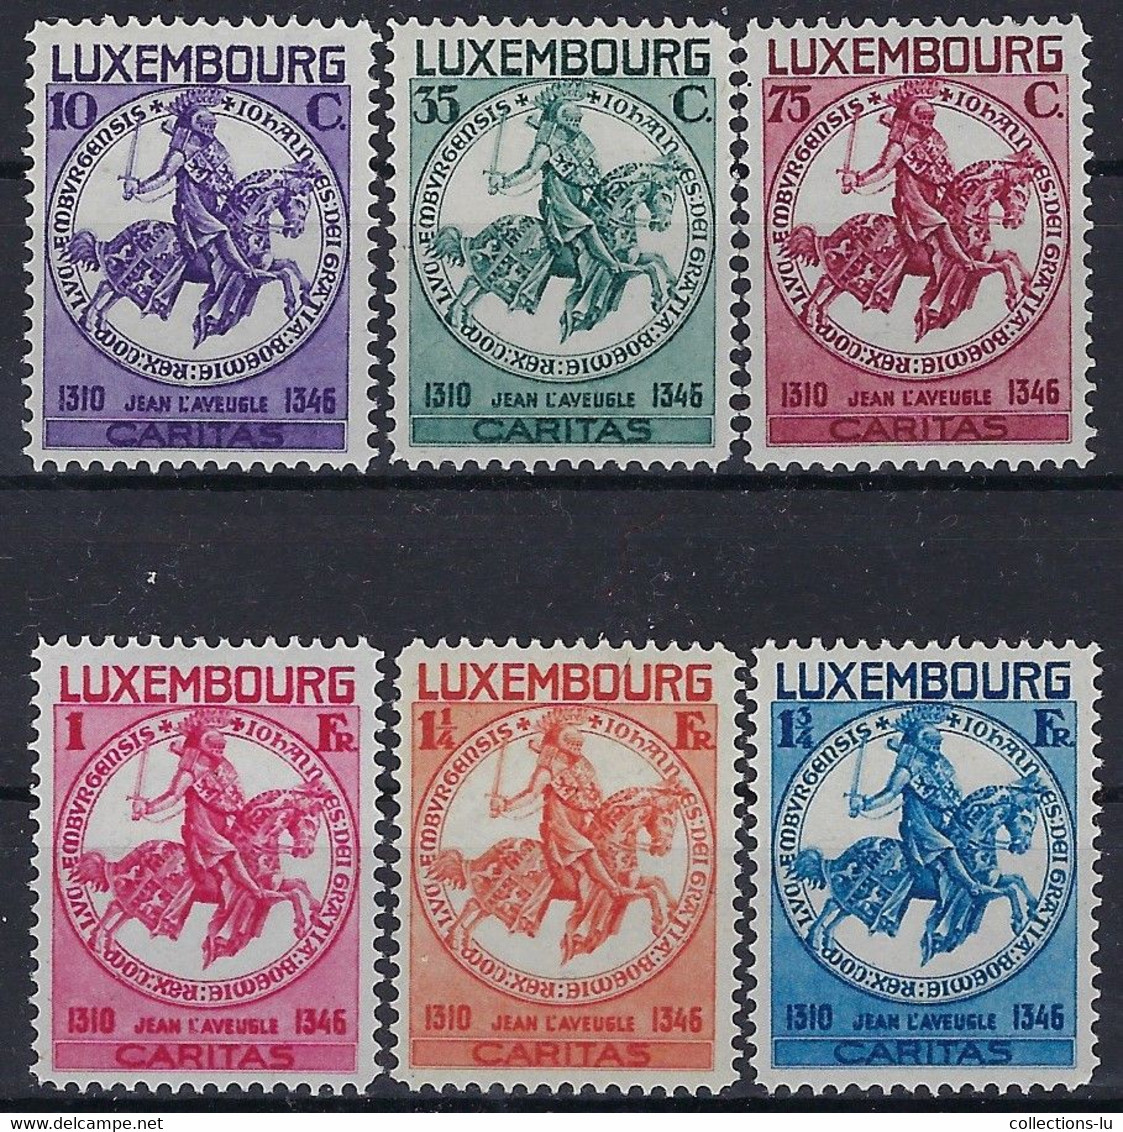 Luxembourg - Luxemburg - Timbres  1934  CARITAS   Jean L'Aveugle  Série MH*  VC.140,- - Used Stamps